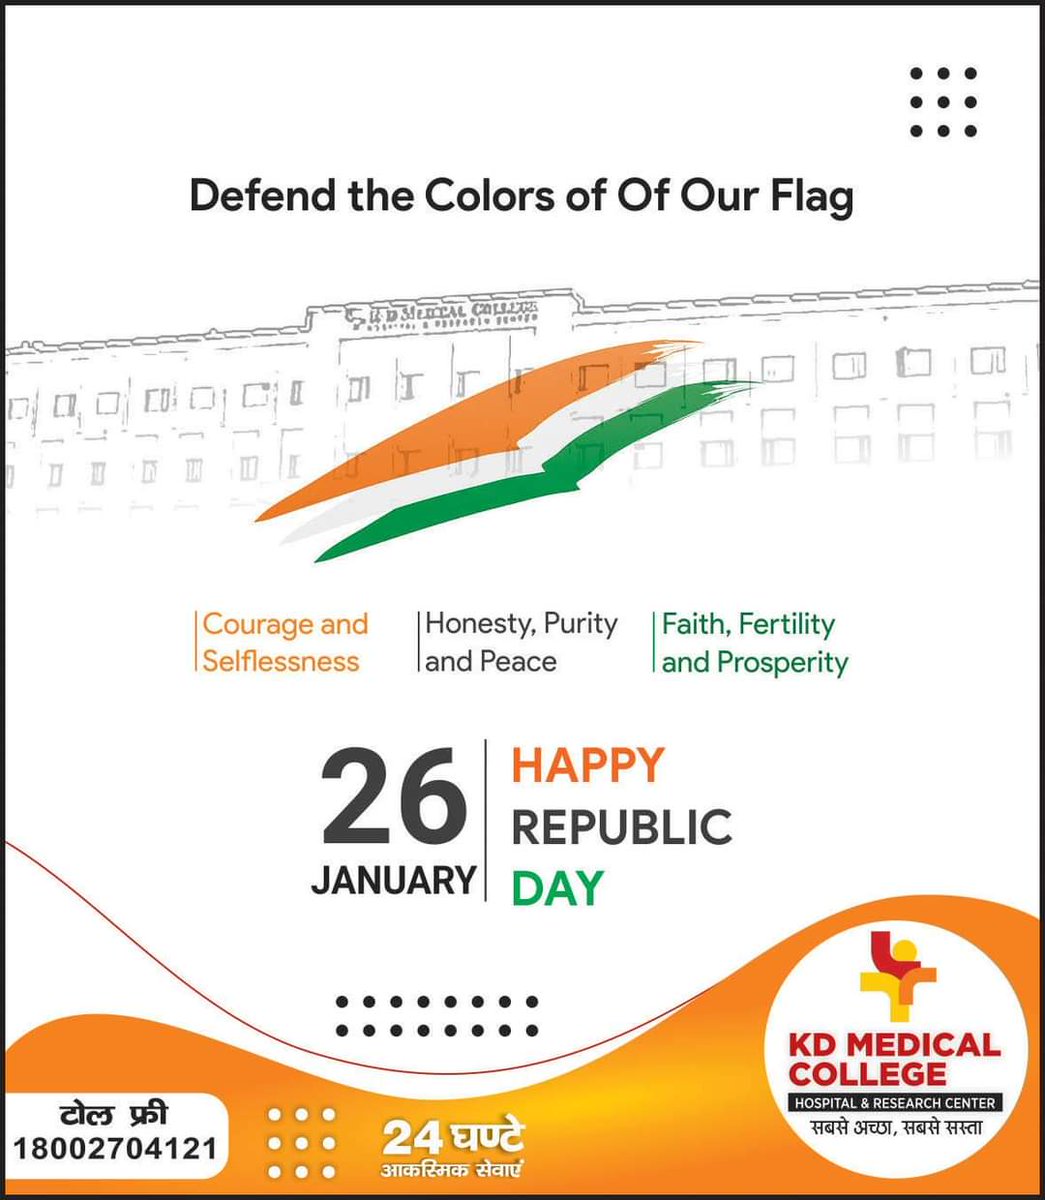 K.D Medical college and research Centre wishes you a very Happy Republic Day 2021! 🇪🇬
.
Let us spend some time today in the 
reflection of the true heroes of India who sacrificed their lives to give us freedom.❤️
.
#kdmedicalcollege #happyrepublicday🇮🇳 #26january #freedomfighter